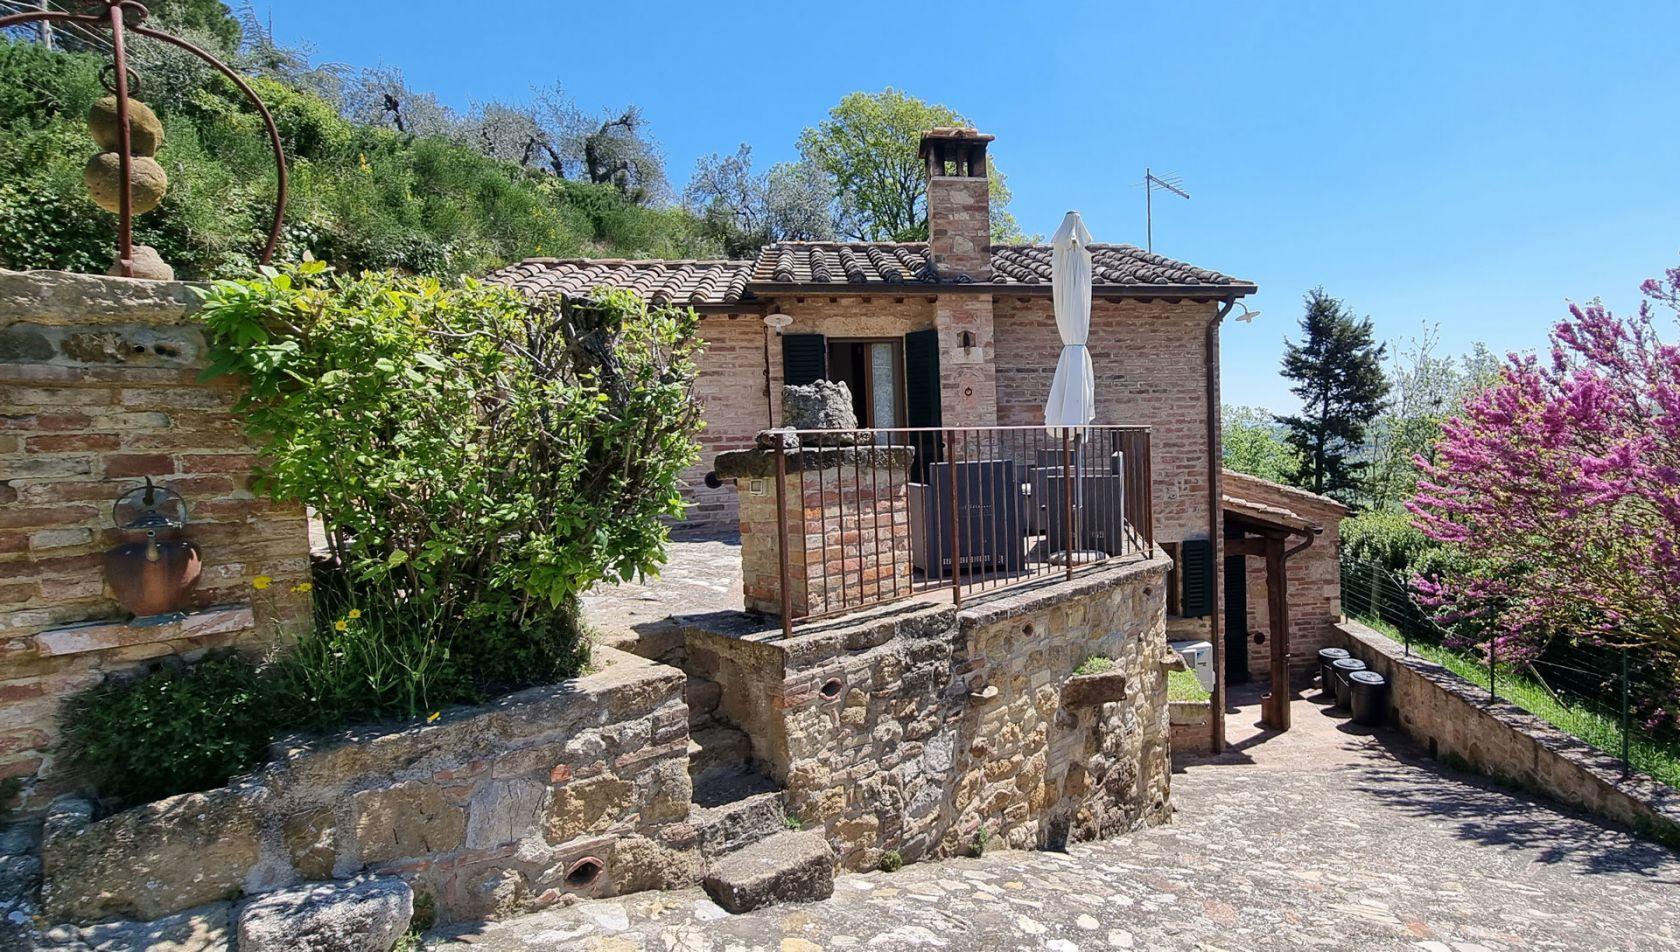 Toscana Immobiliare - Country house in Tuscany, stone villa for sale in Montepulciano